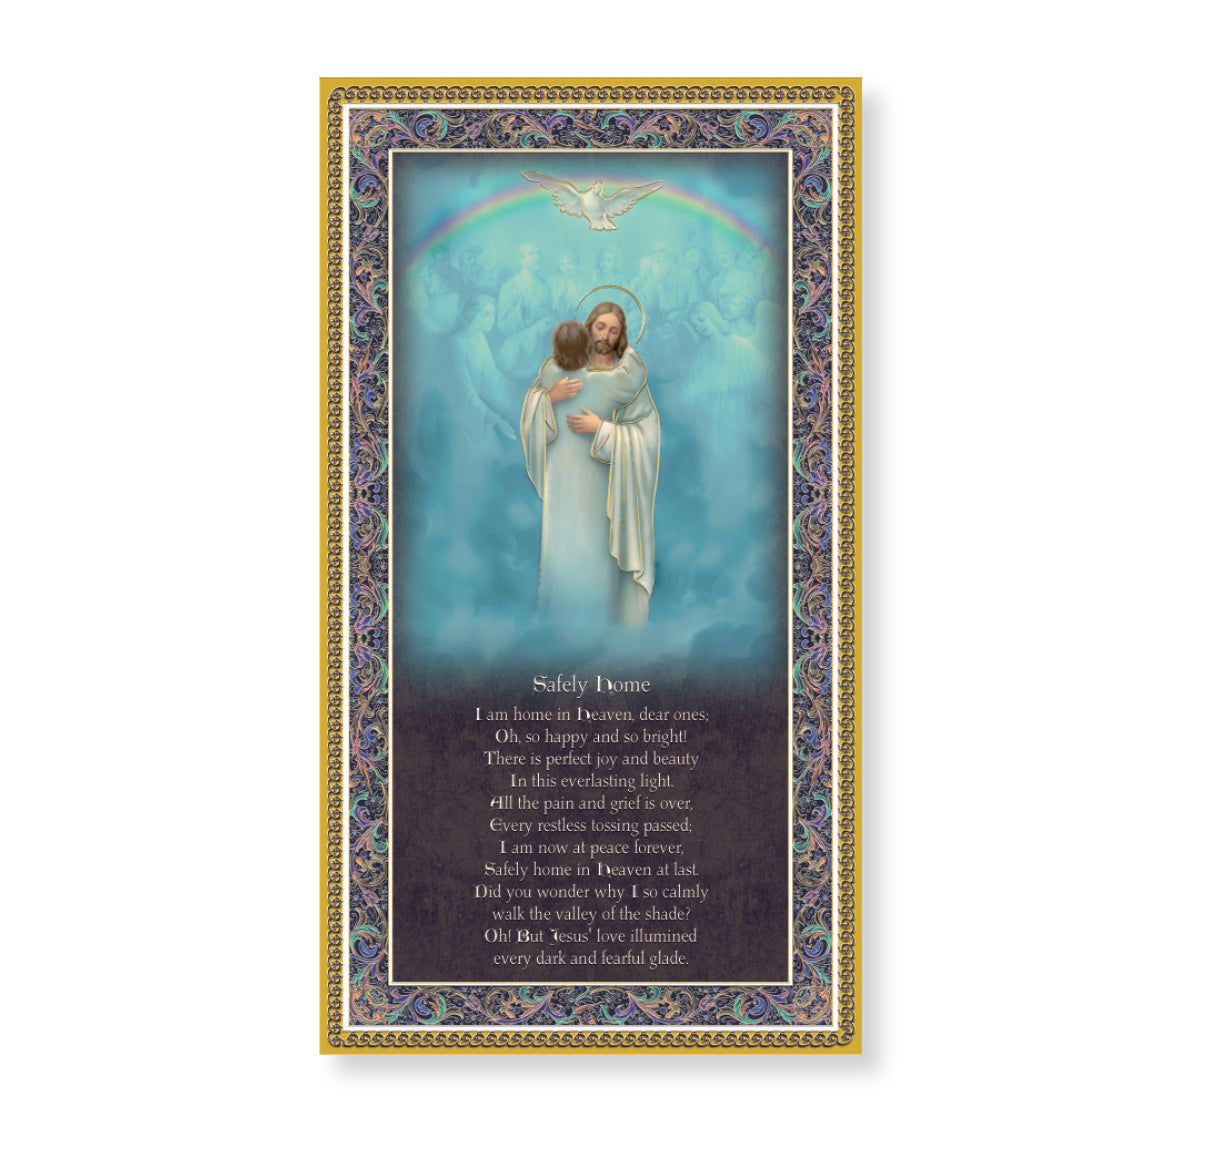 Safely Home - Jesus Welcoming Home Gold Foil Wood Plaque